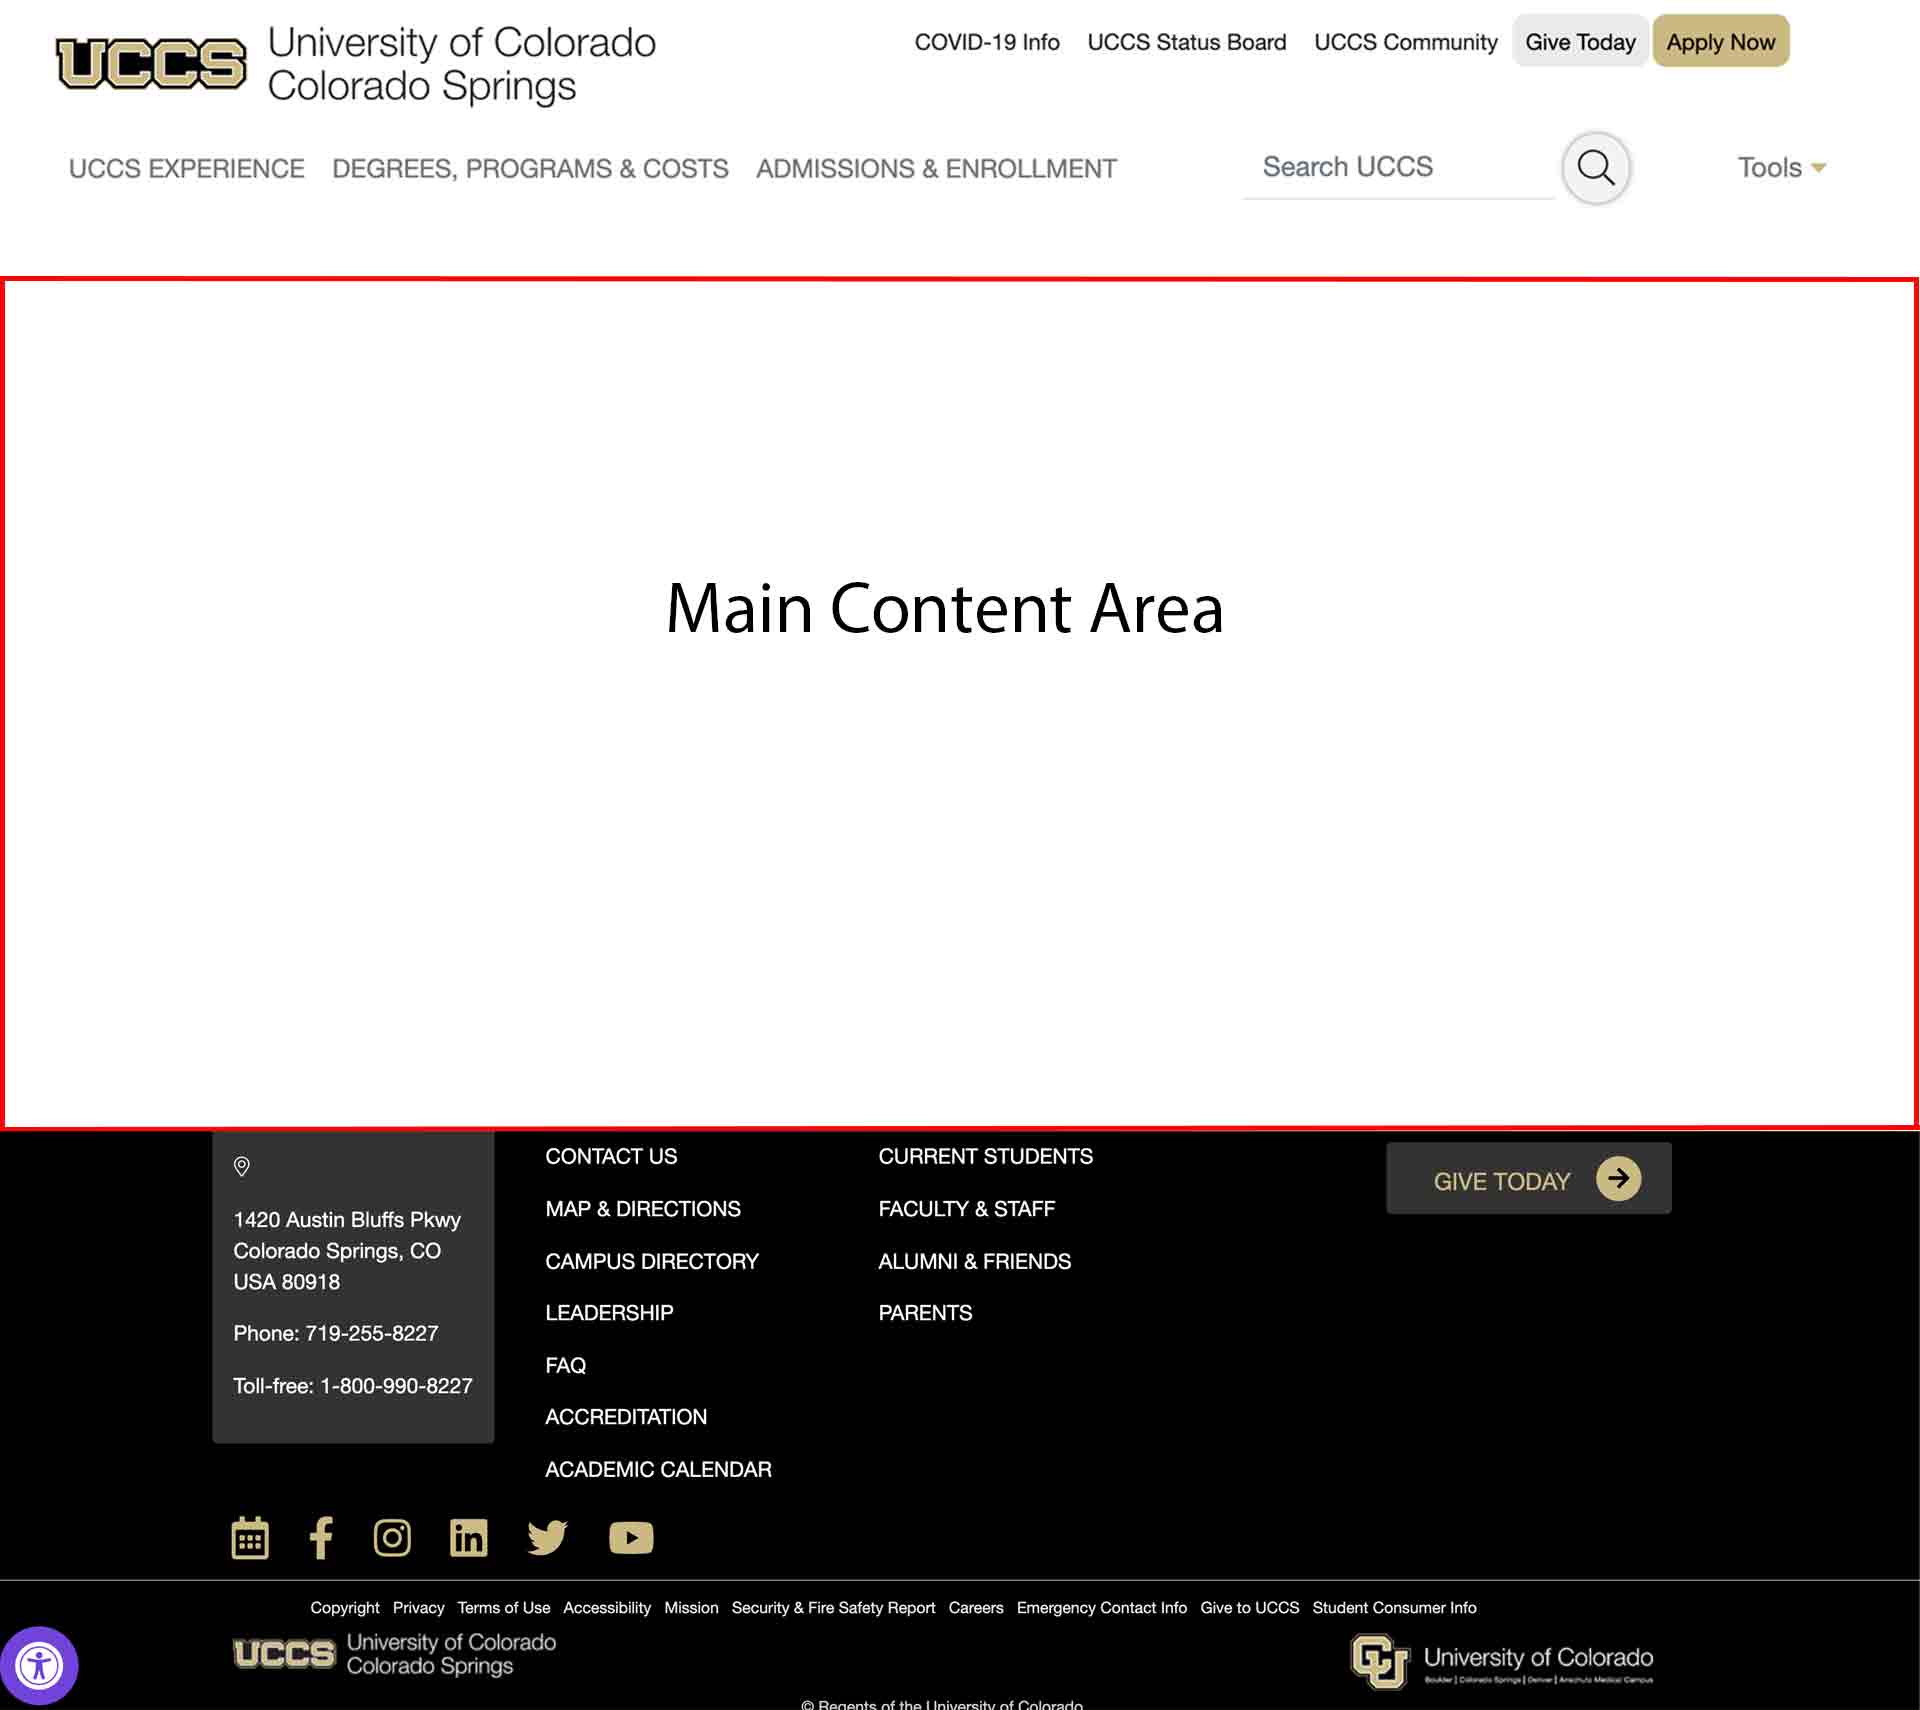 header, main content area and footer on a typical page